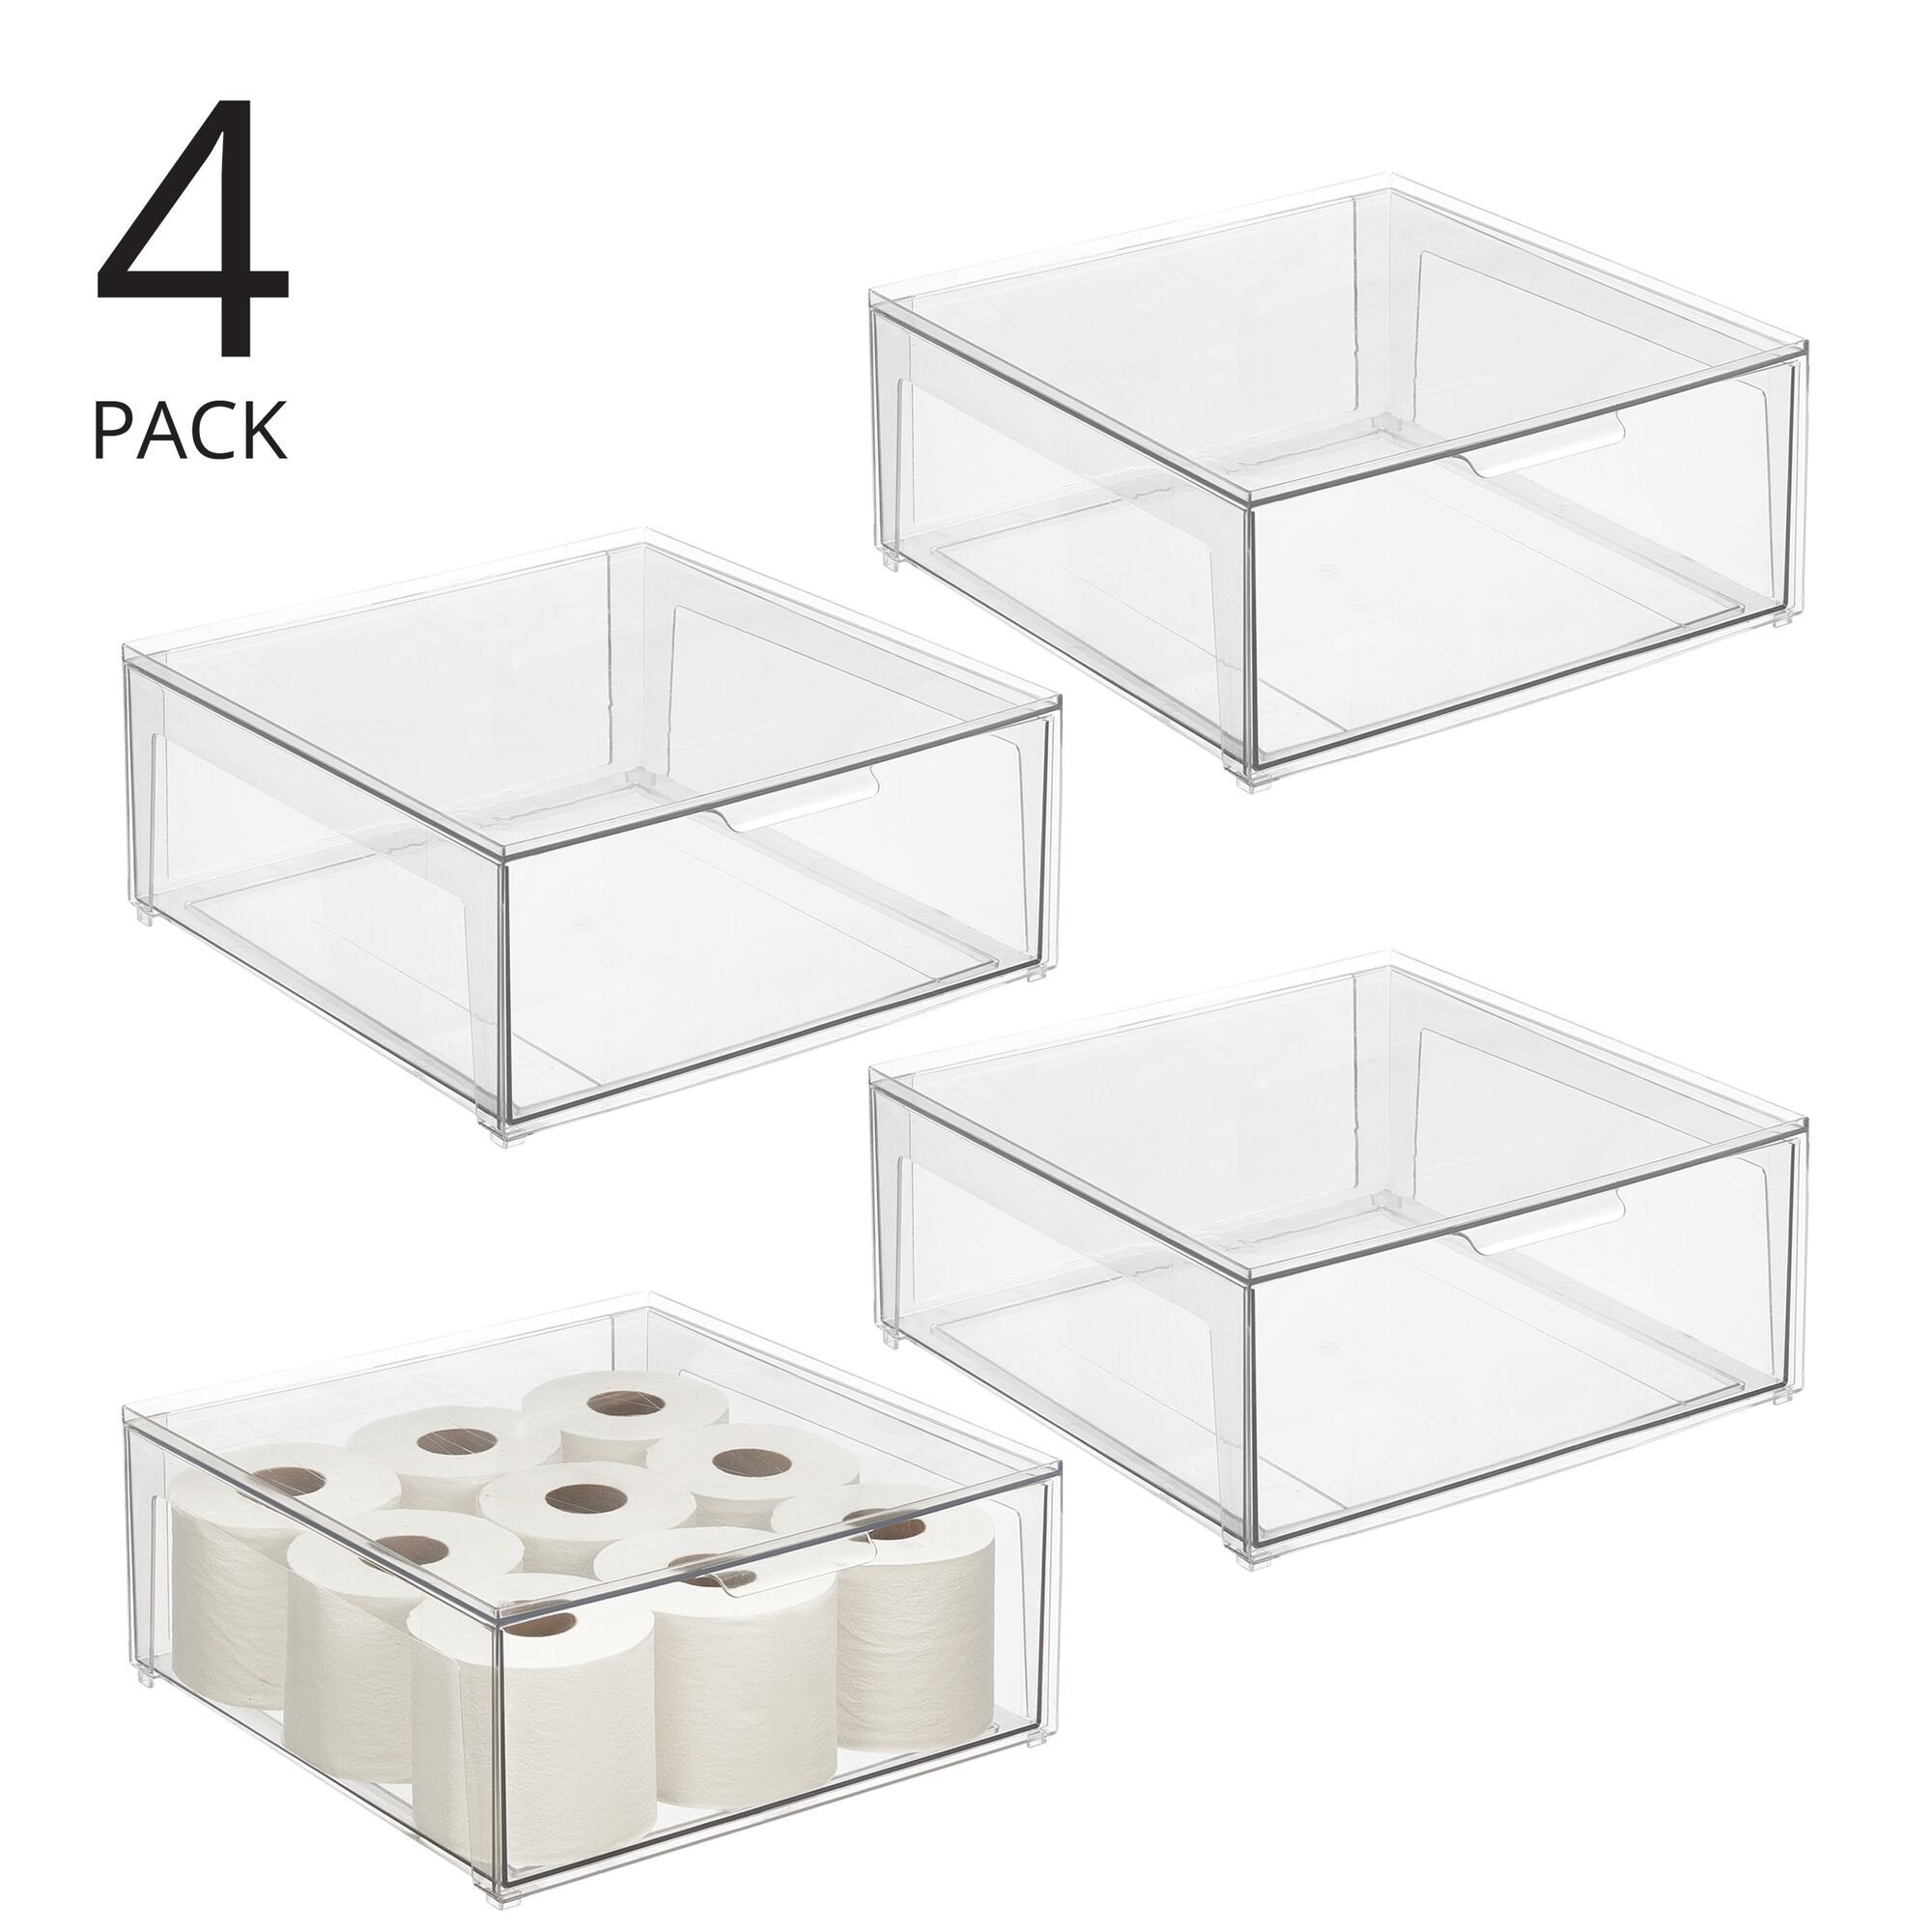 Top Notch 11.5 x 14.5 Multicolor Plastic Box with 9 Containers - Plastic Storage - Storage & Organization